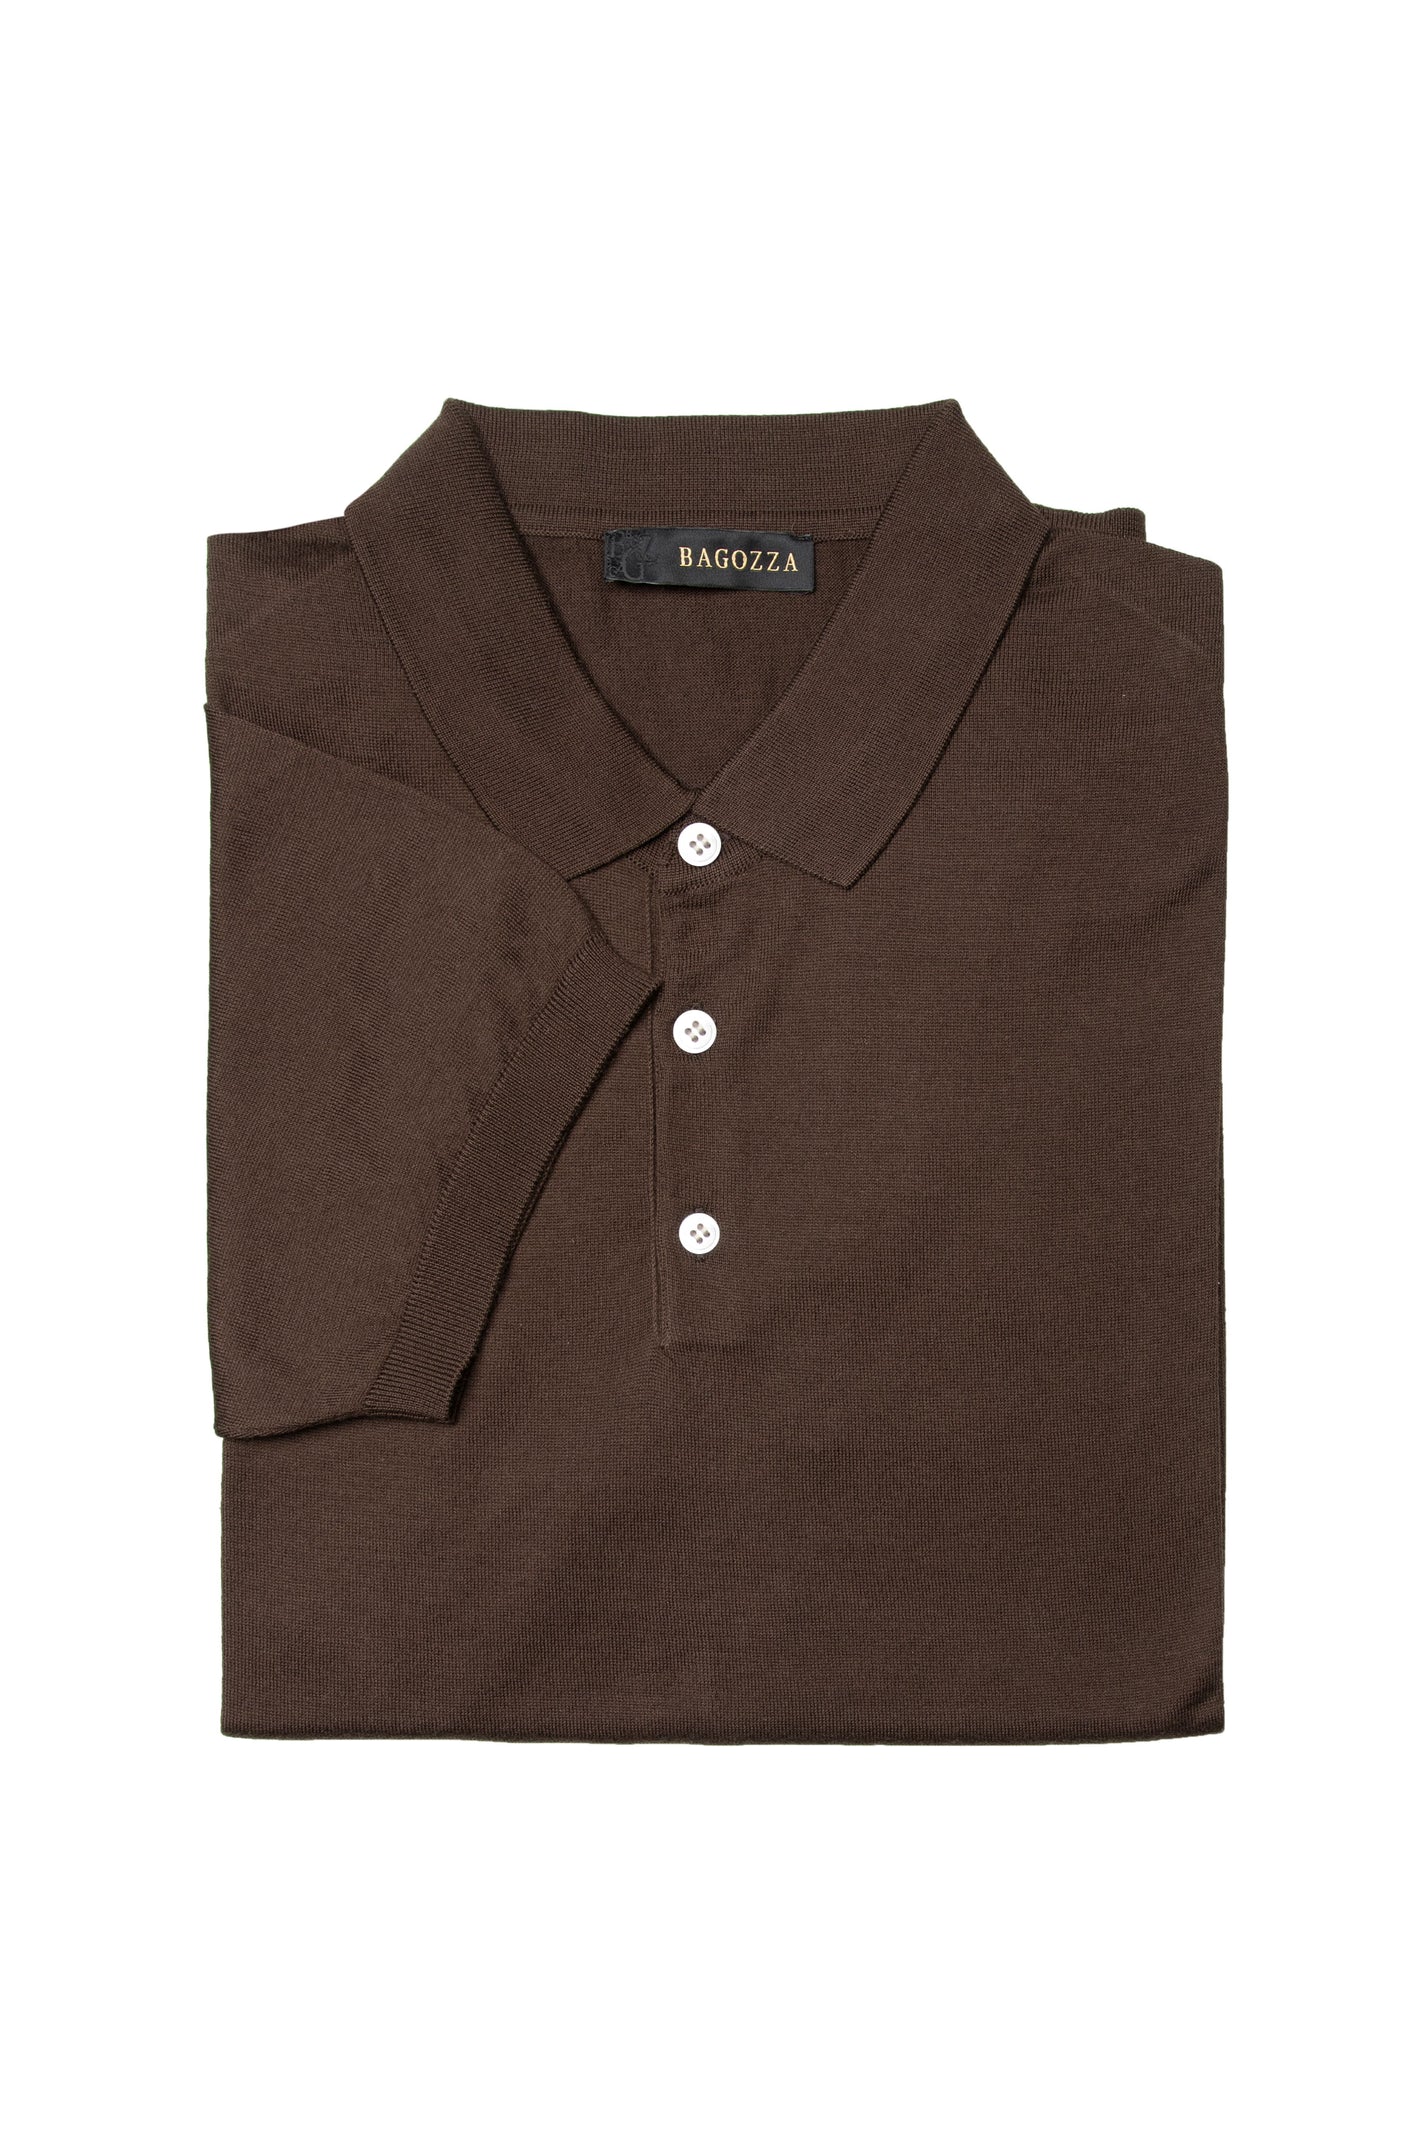 Men's Bagozza 100% cotton short sleeve golf shirt with ribbing in brown (6296) - available in-store, 337 Monty Naicker Street, Durban CBD or online at Omar's Tailors & Outfitters online store.   A men's fashion curation for South African men - established in 1911.